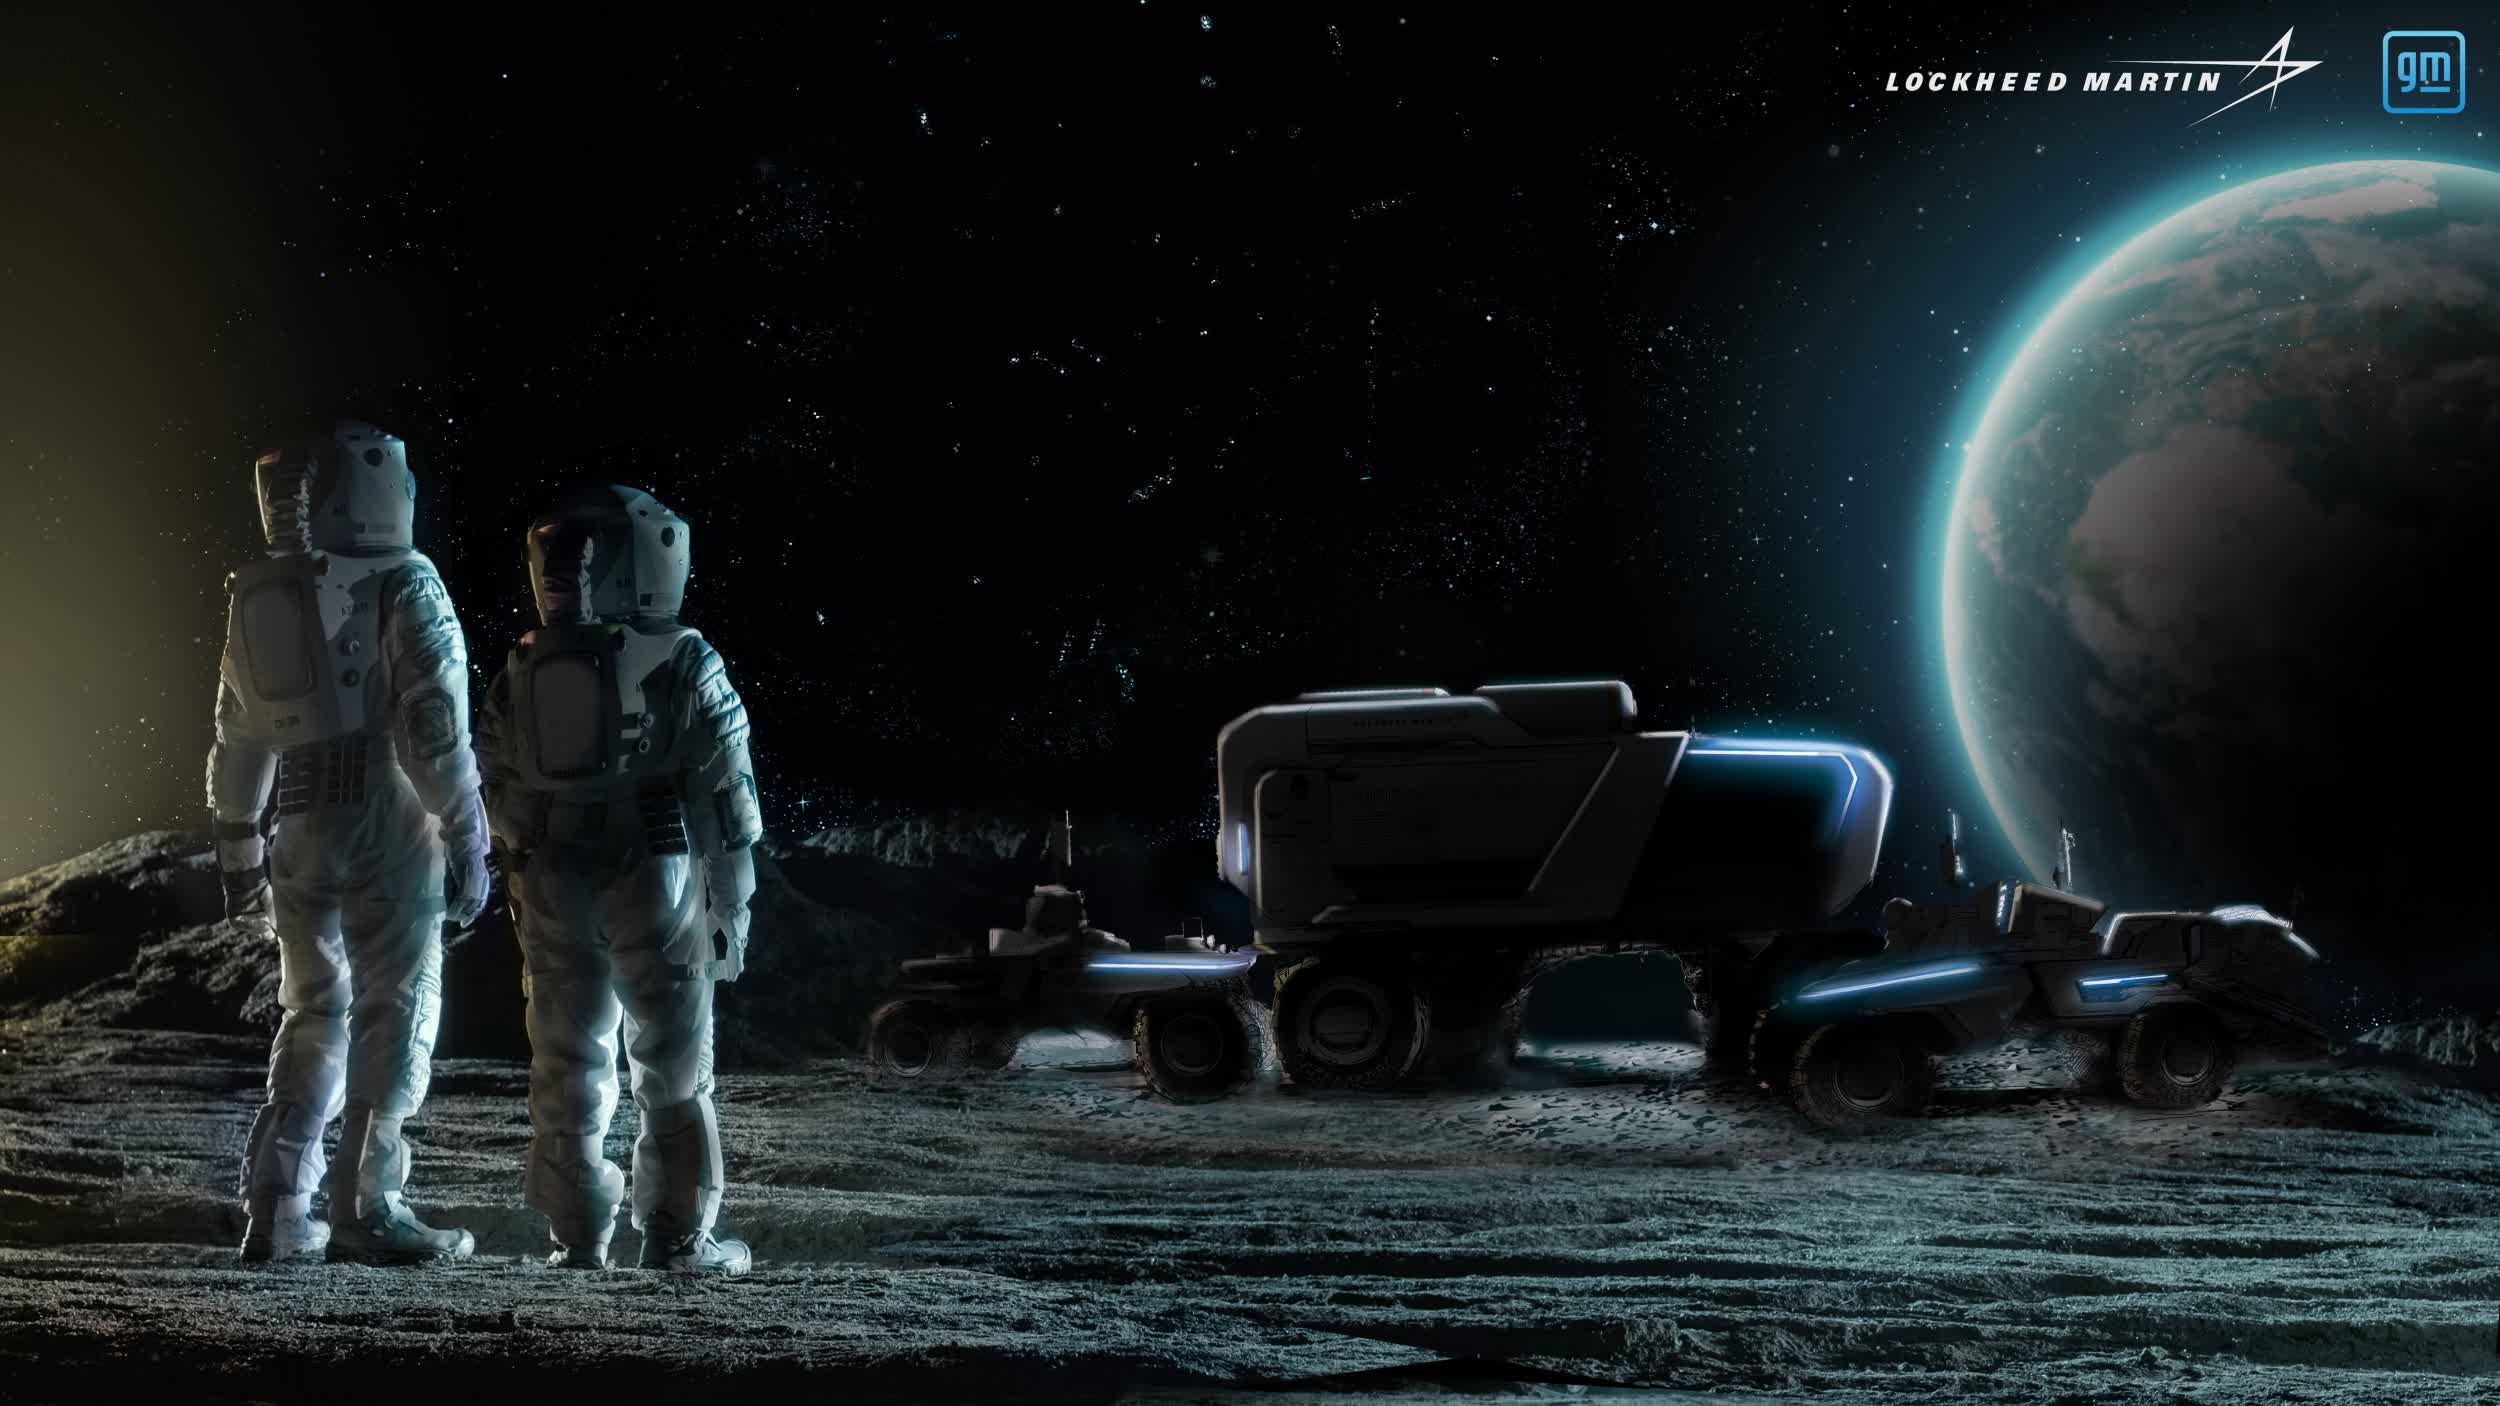 General Motors and Lockheed Martin team up to build lunar rover for NASA's return to the Moon